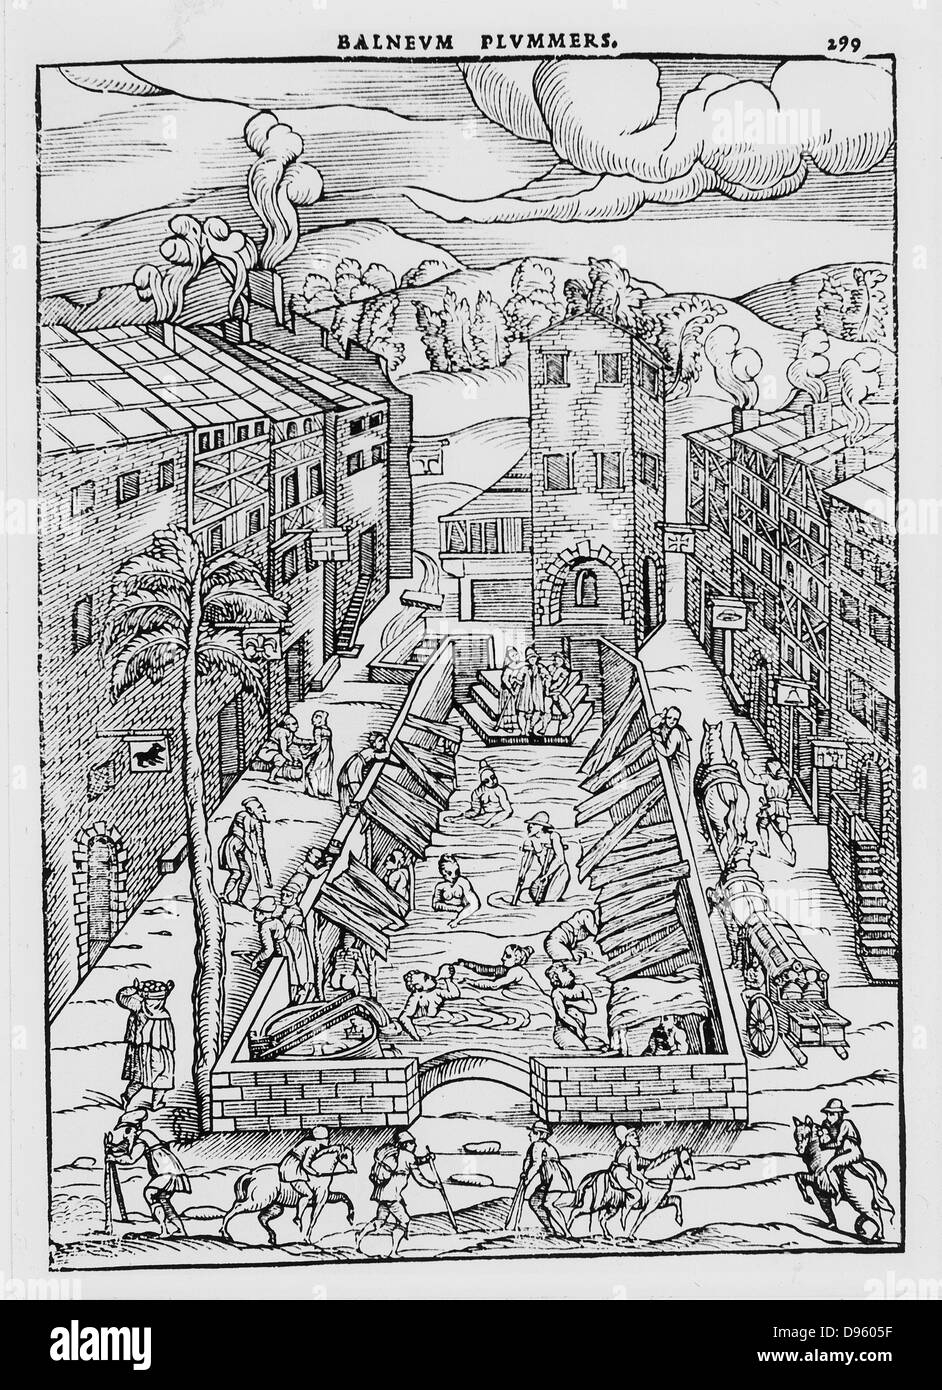 The Baths of Plombiere, woodcut from Thomas Guinta 'De Balneis omnia ...', Venice, 1553.  Mixed public baths were a feature of city life, partic ularly in many of the German city states, but were banned after syphilis and gonorrhea reached epidemic proportions. Stock Photo